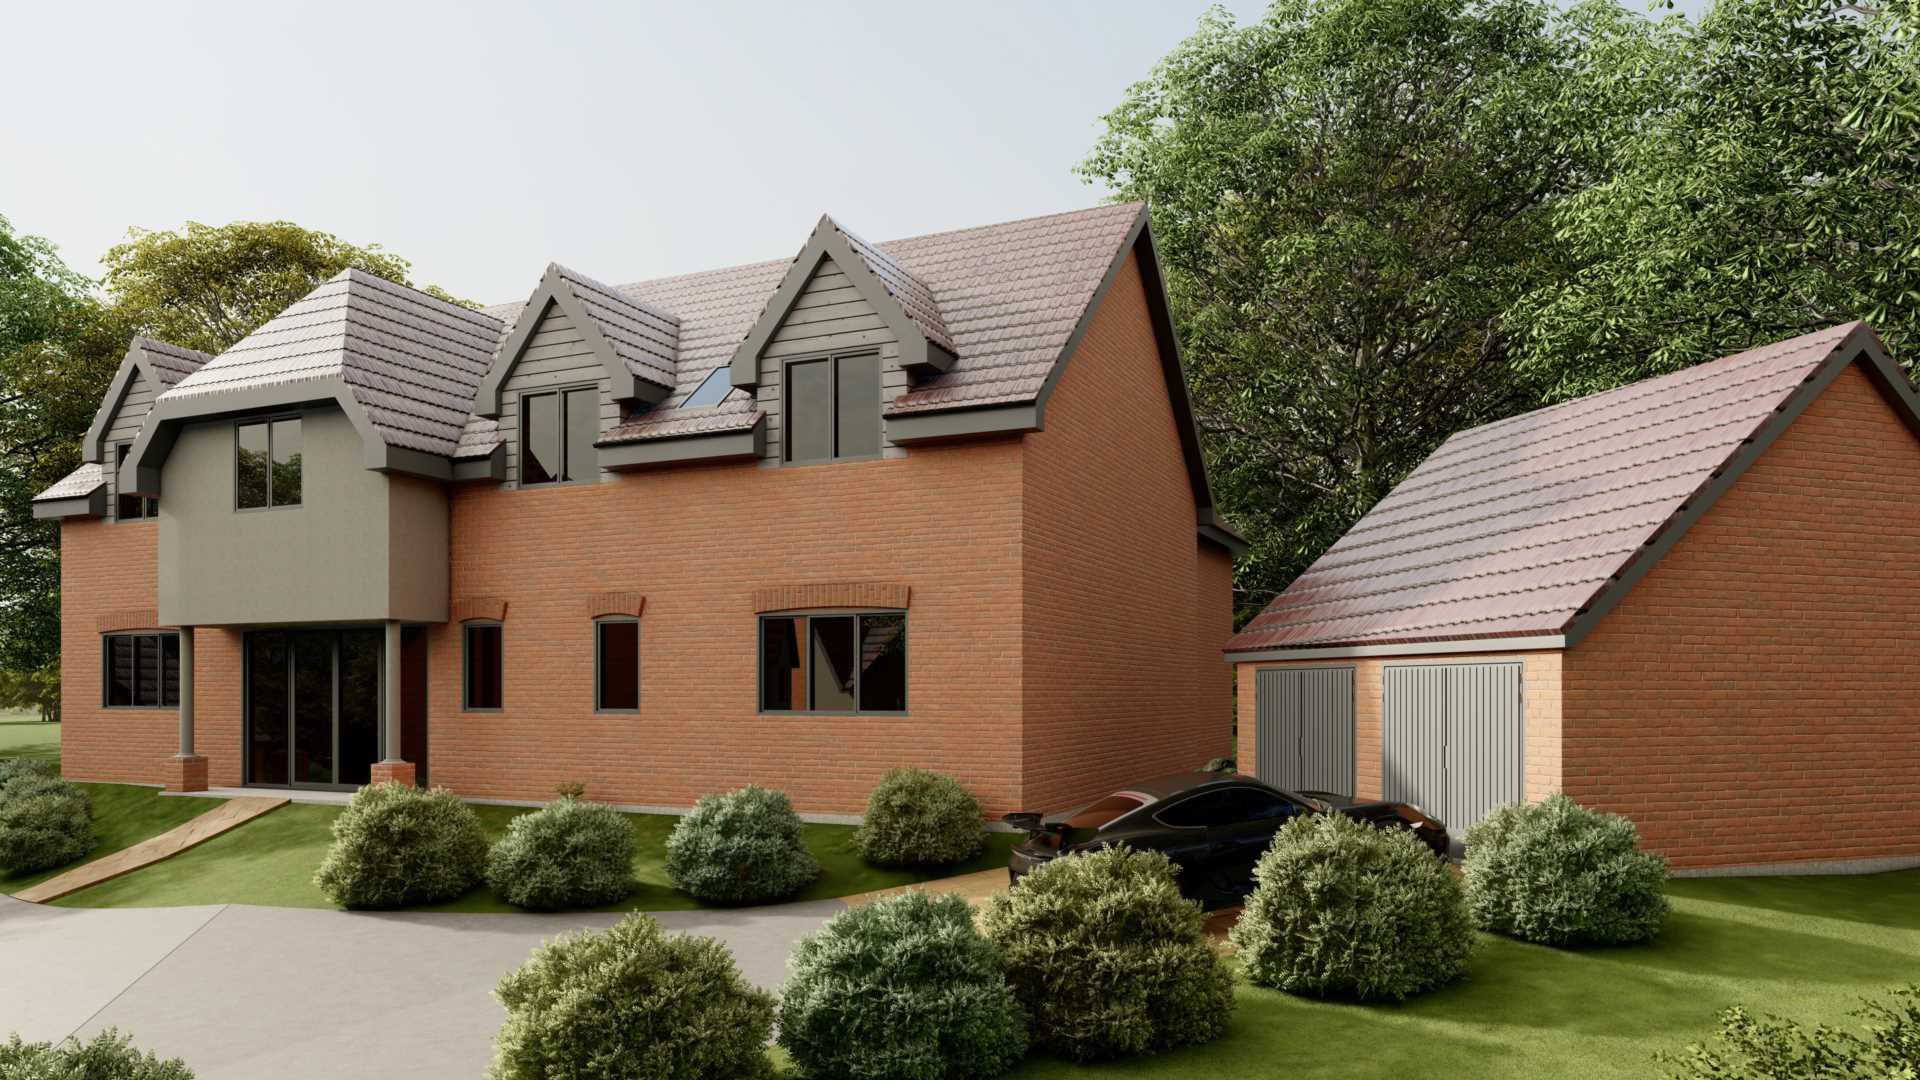 BERKHAMSTED COMING SOON - ELEANOR CLOSE, South Park Gardens, Image 5